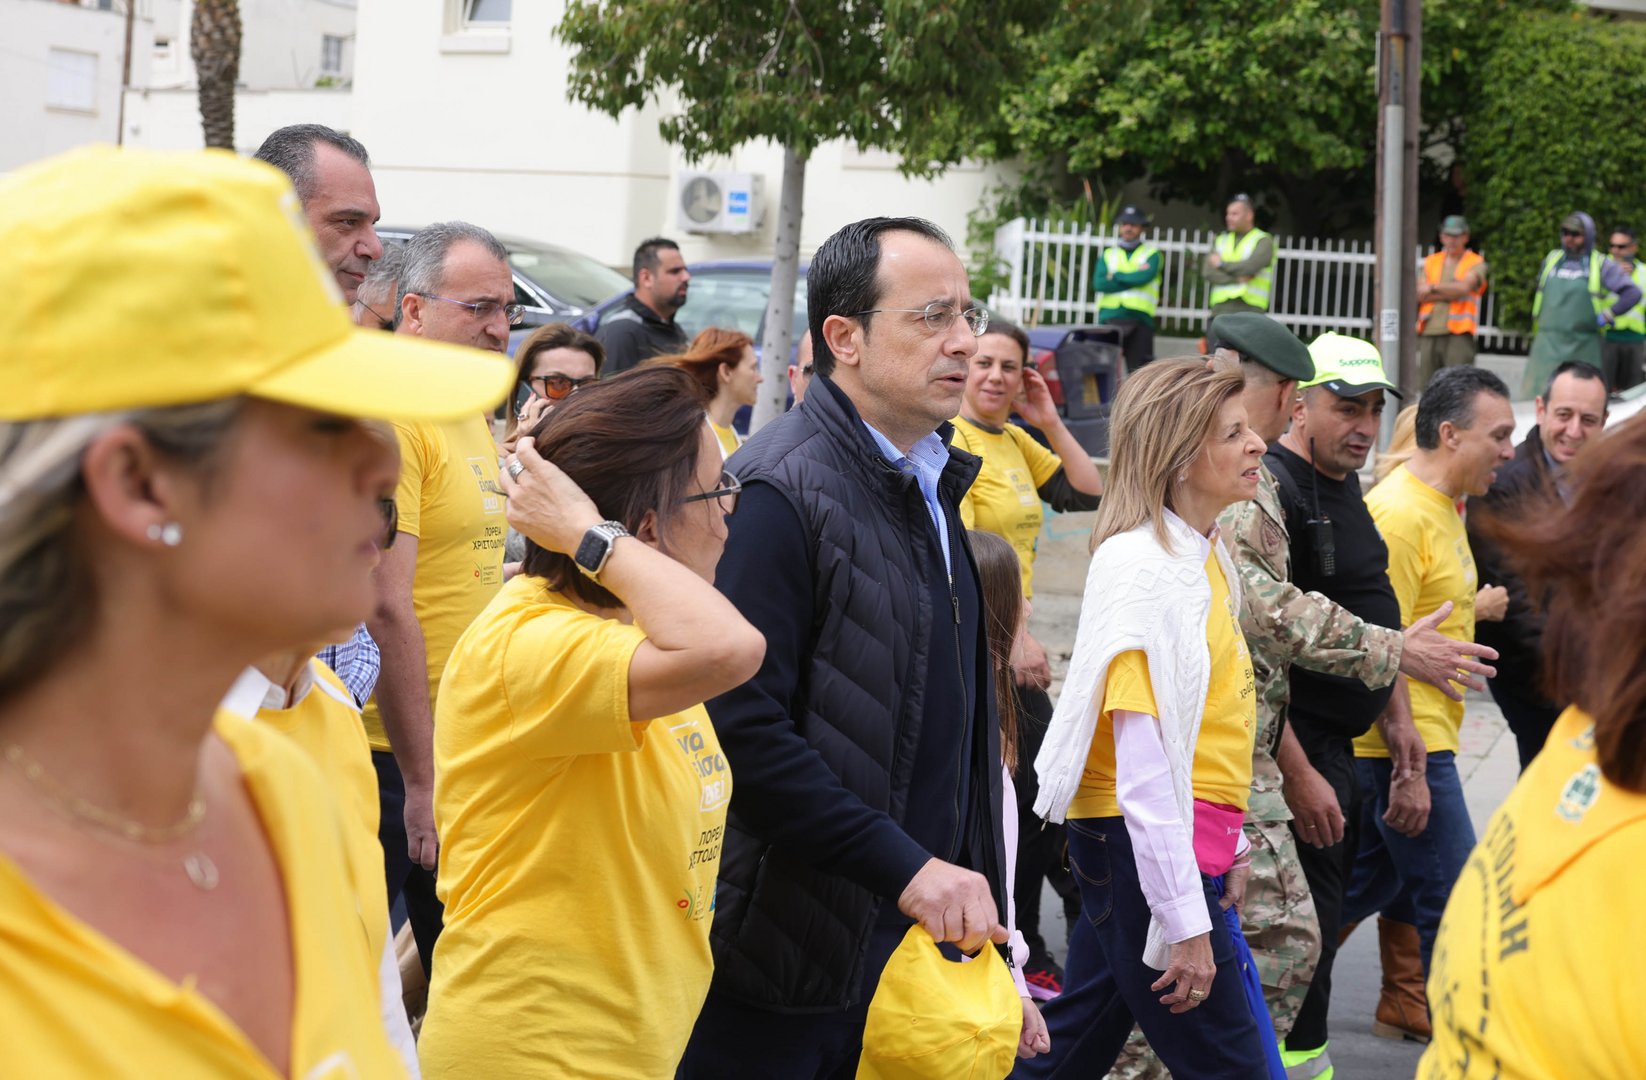 image President kicks off anti-cancer charity march